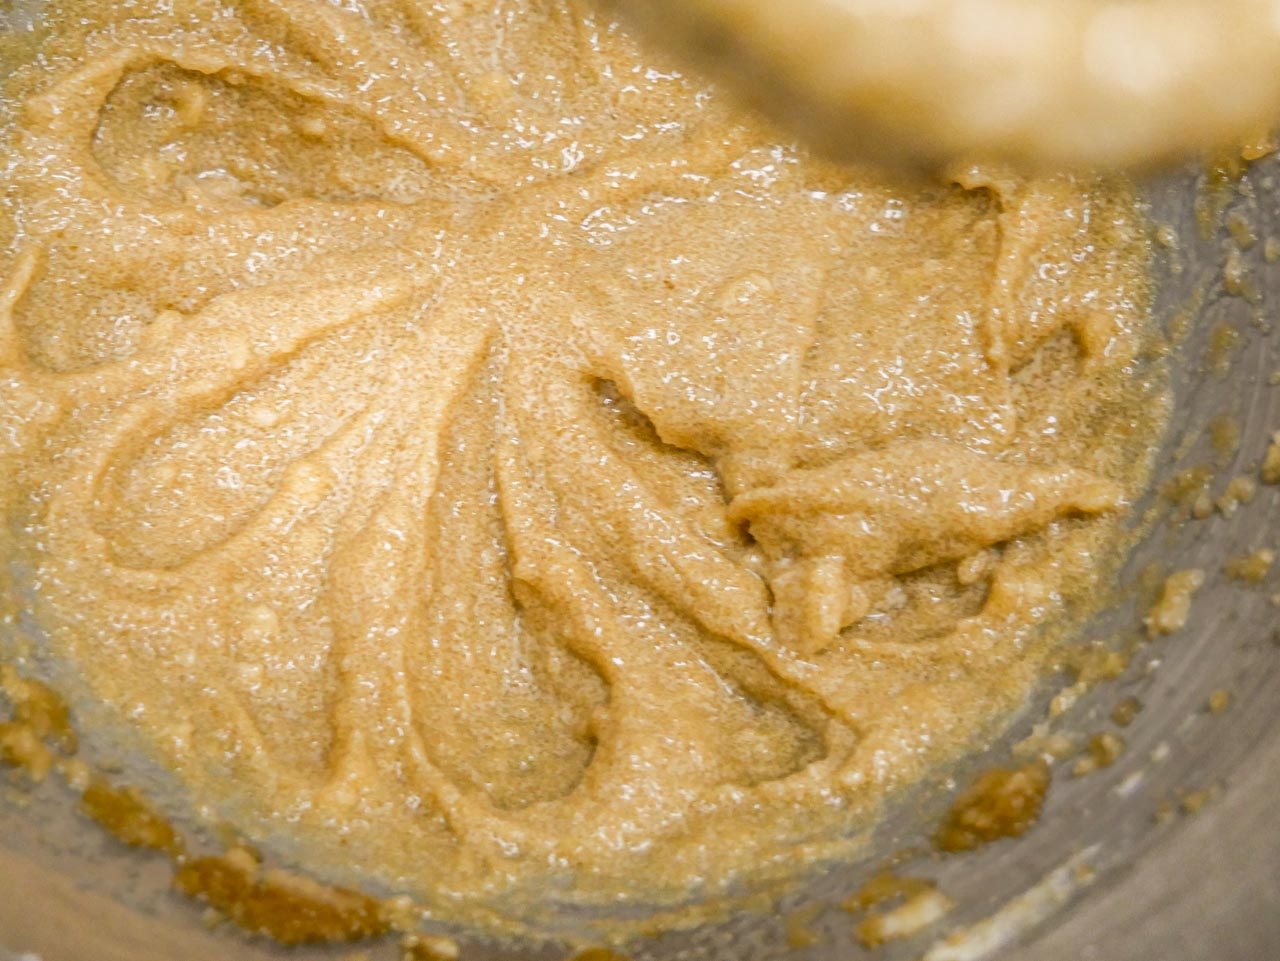 Creamed butter and sugar for gingerbread cakes